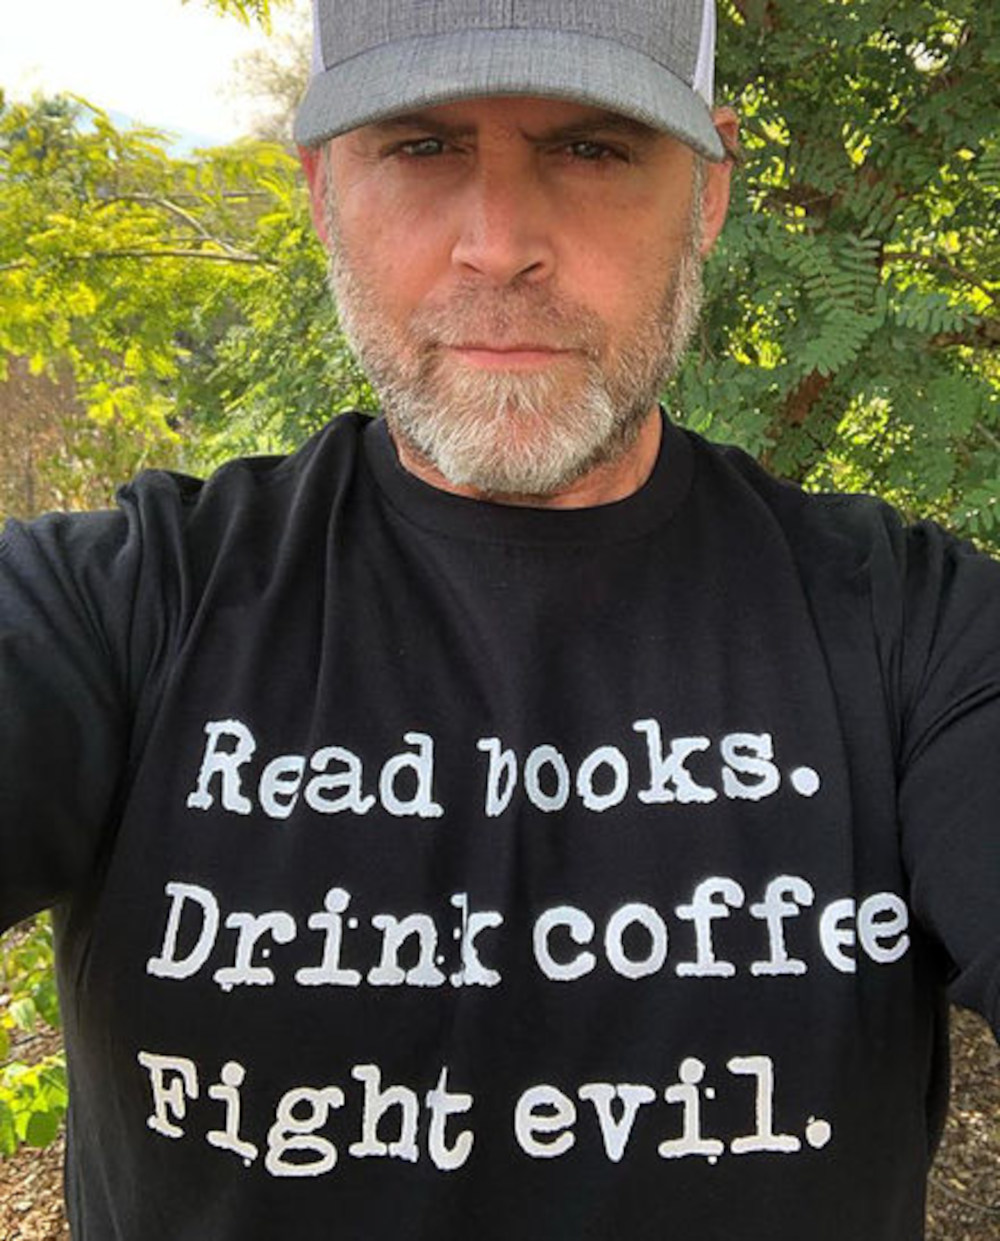 An image of Chris Baron. He wears a gray hat and a black shirt that reads "Read books. Drink coffee. Fight evil."